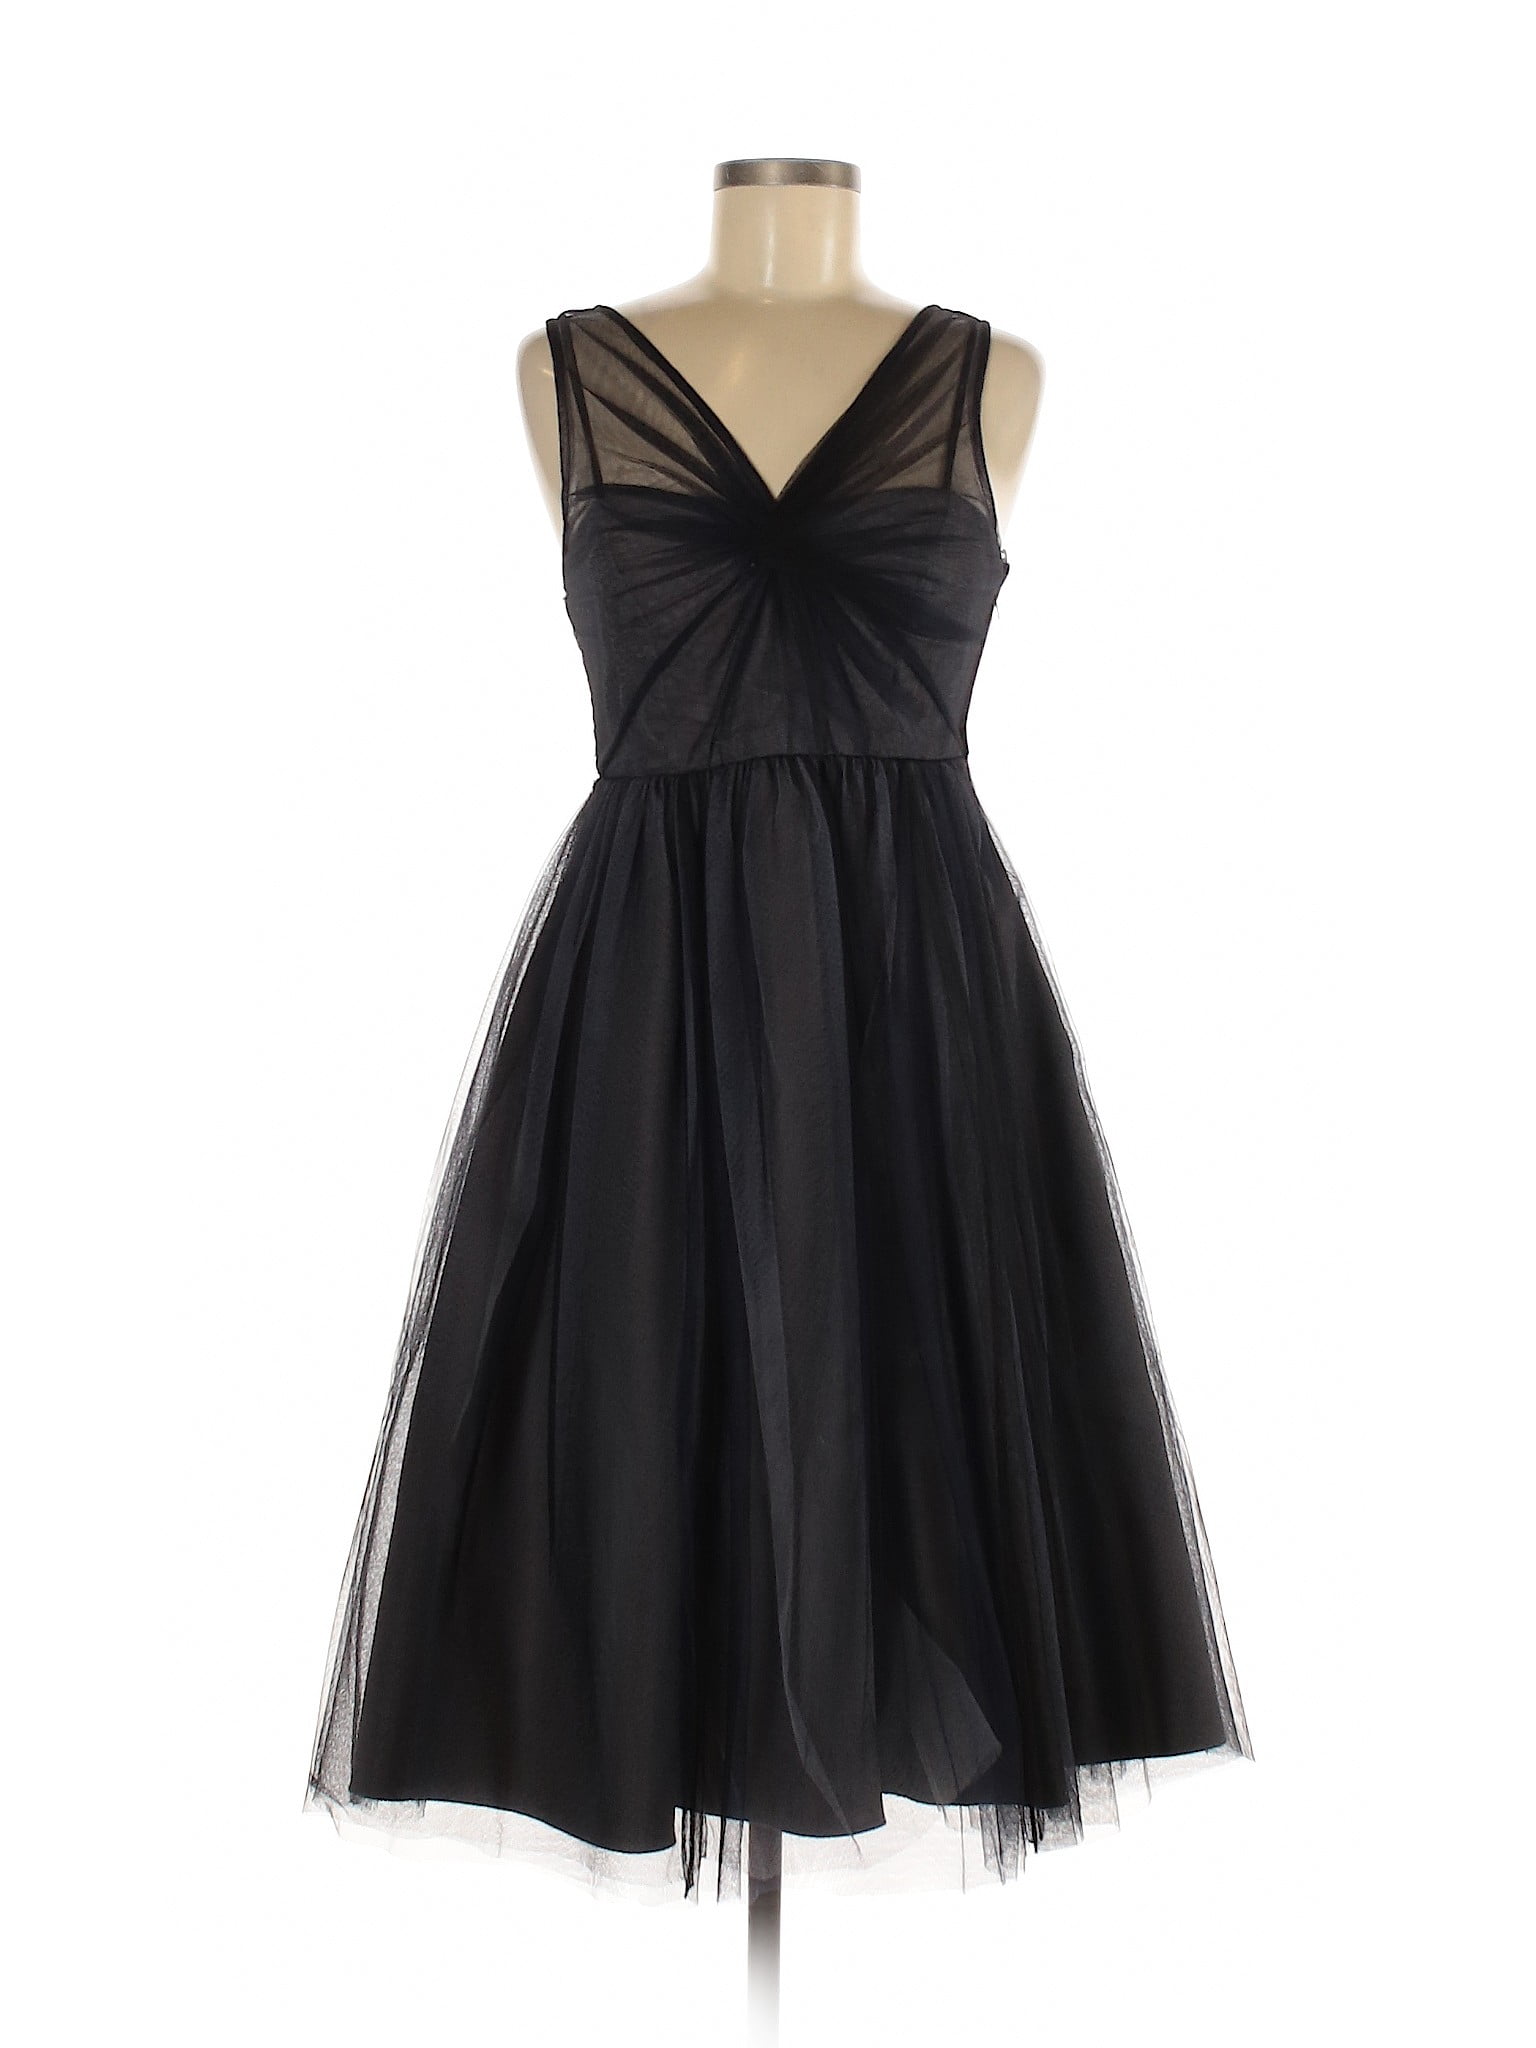 Hoss Intropia - Pre-Owned Hoss Intropia Women's Size 38 Cocktail Dress ...